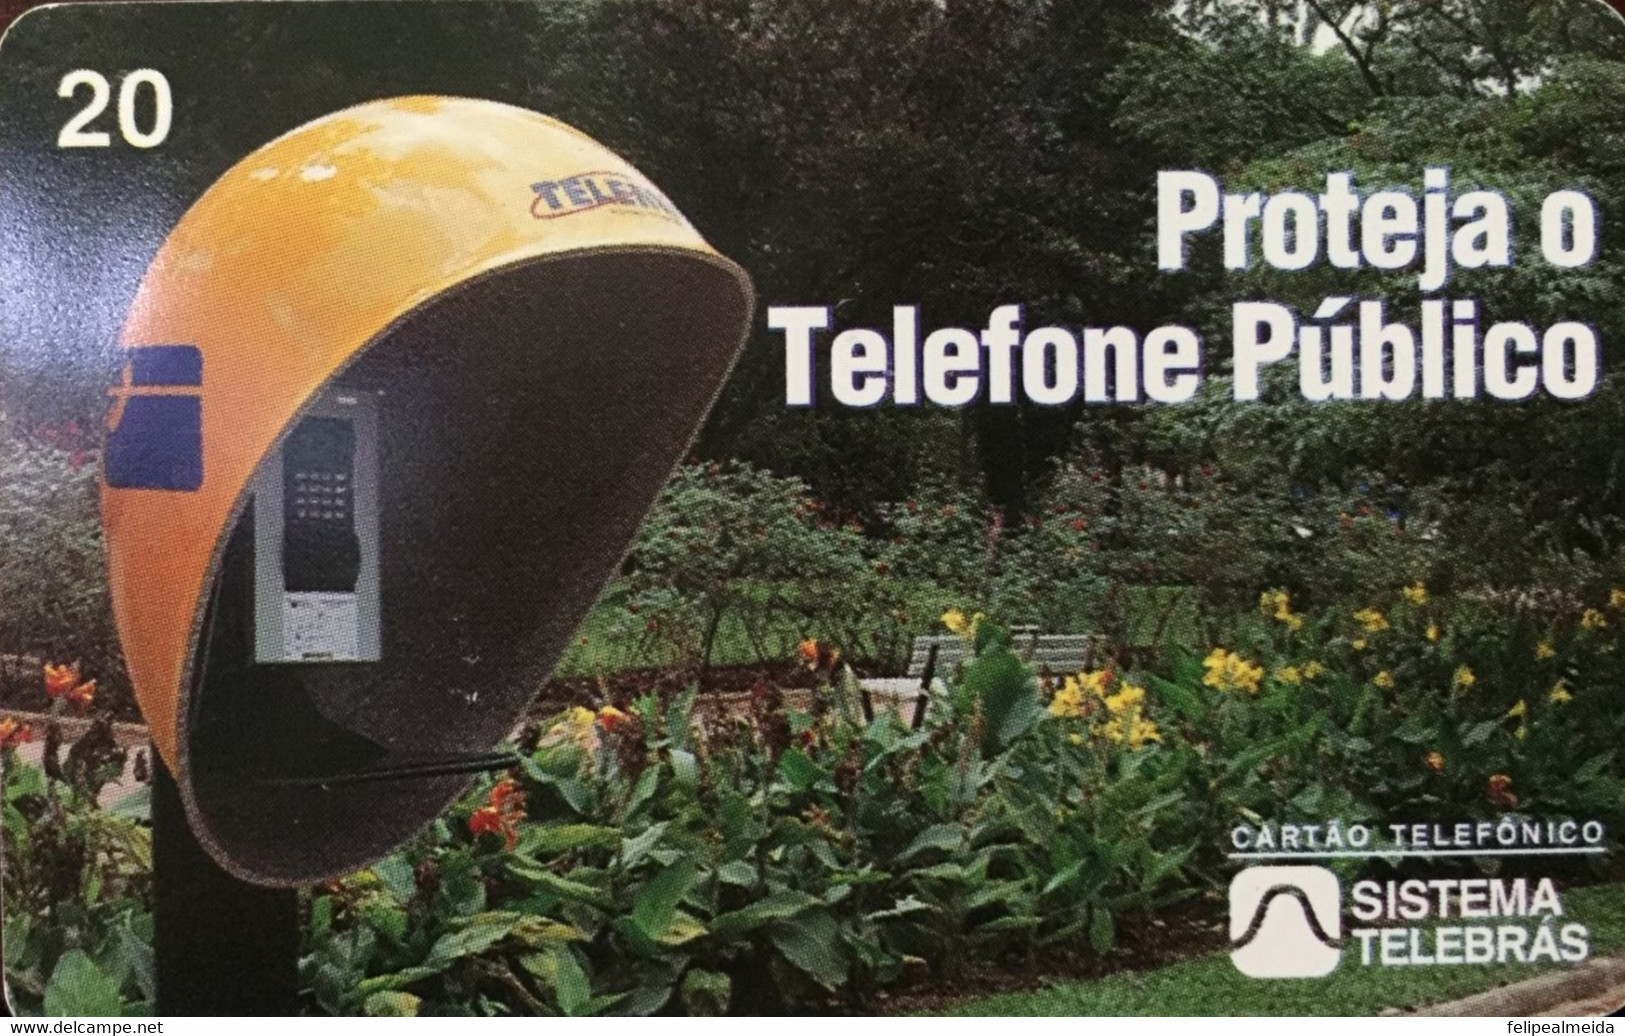 Phone Card Manufactured By Telebras In 1998 - Advertising Campaign For The Conservation Of Public Telephones - Operatori Telecom